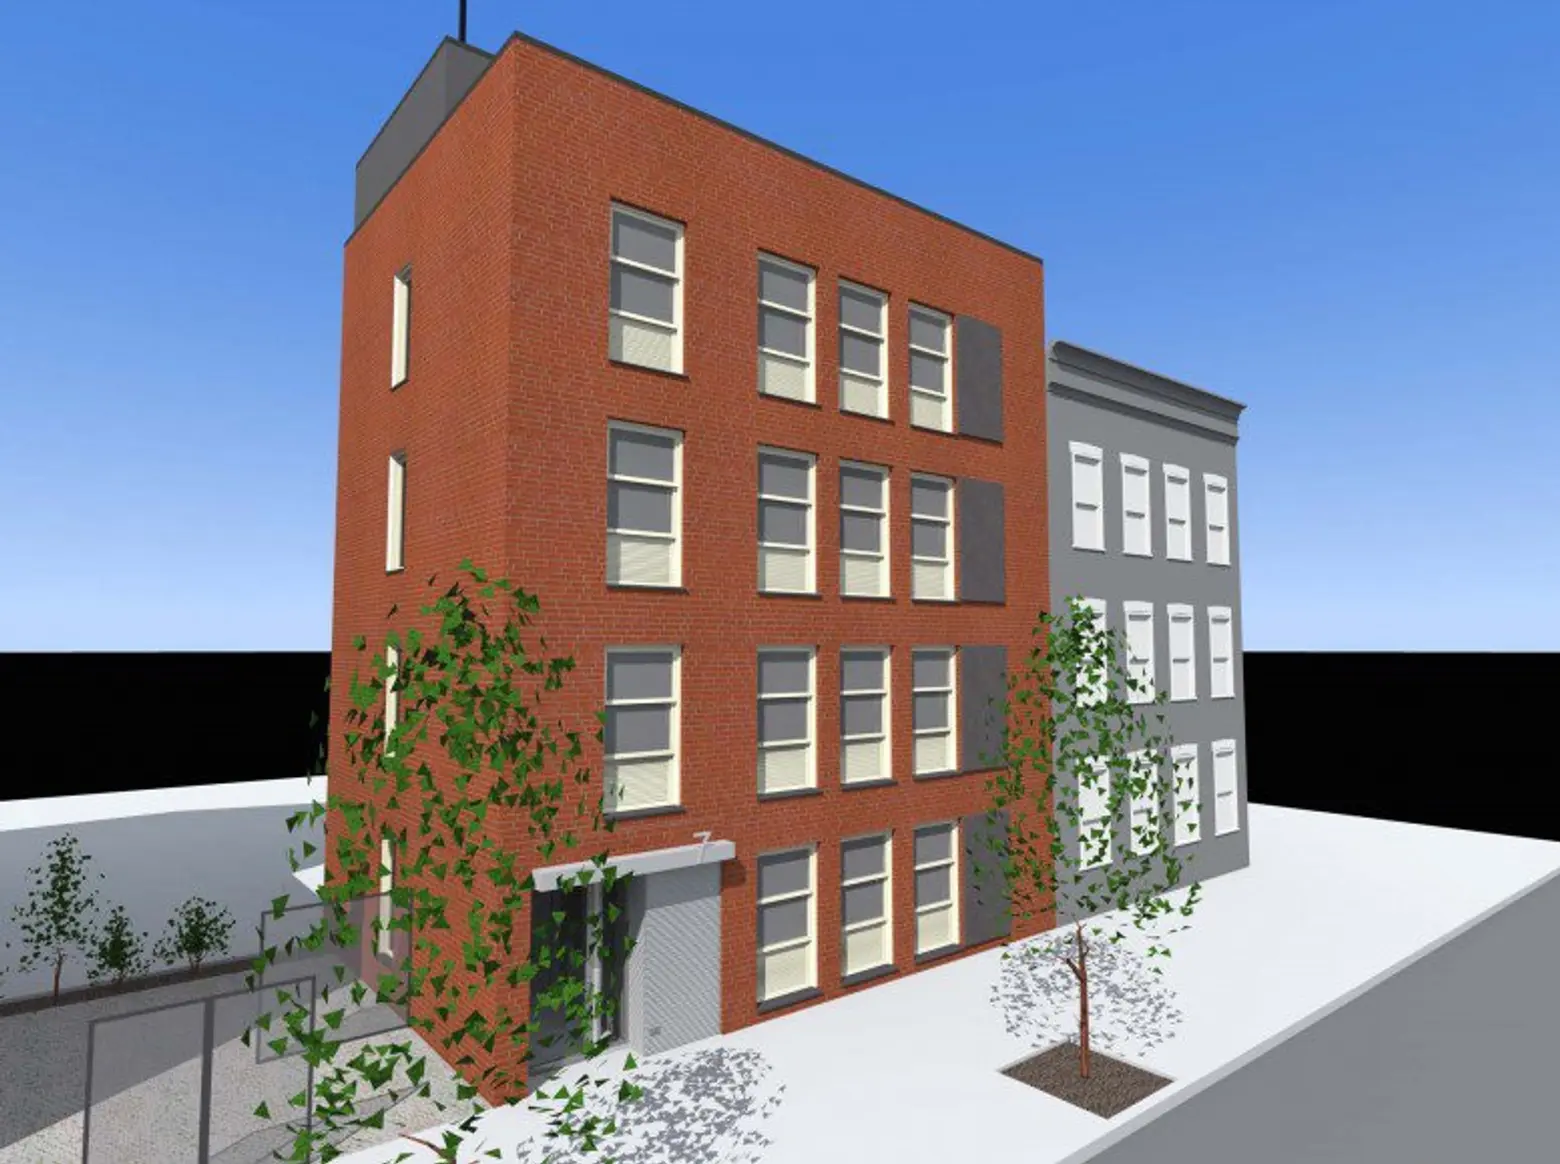 Apply Now for 13 New Affordable Apartments Across Williamsburg, Starting at $756/Month